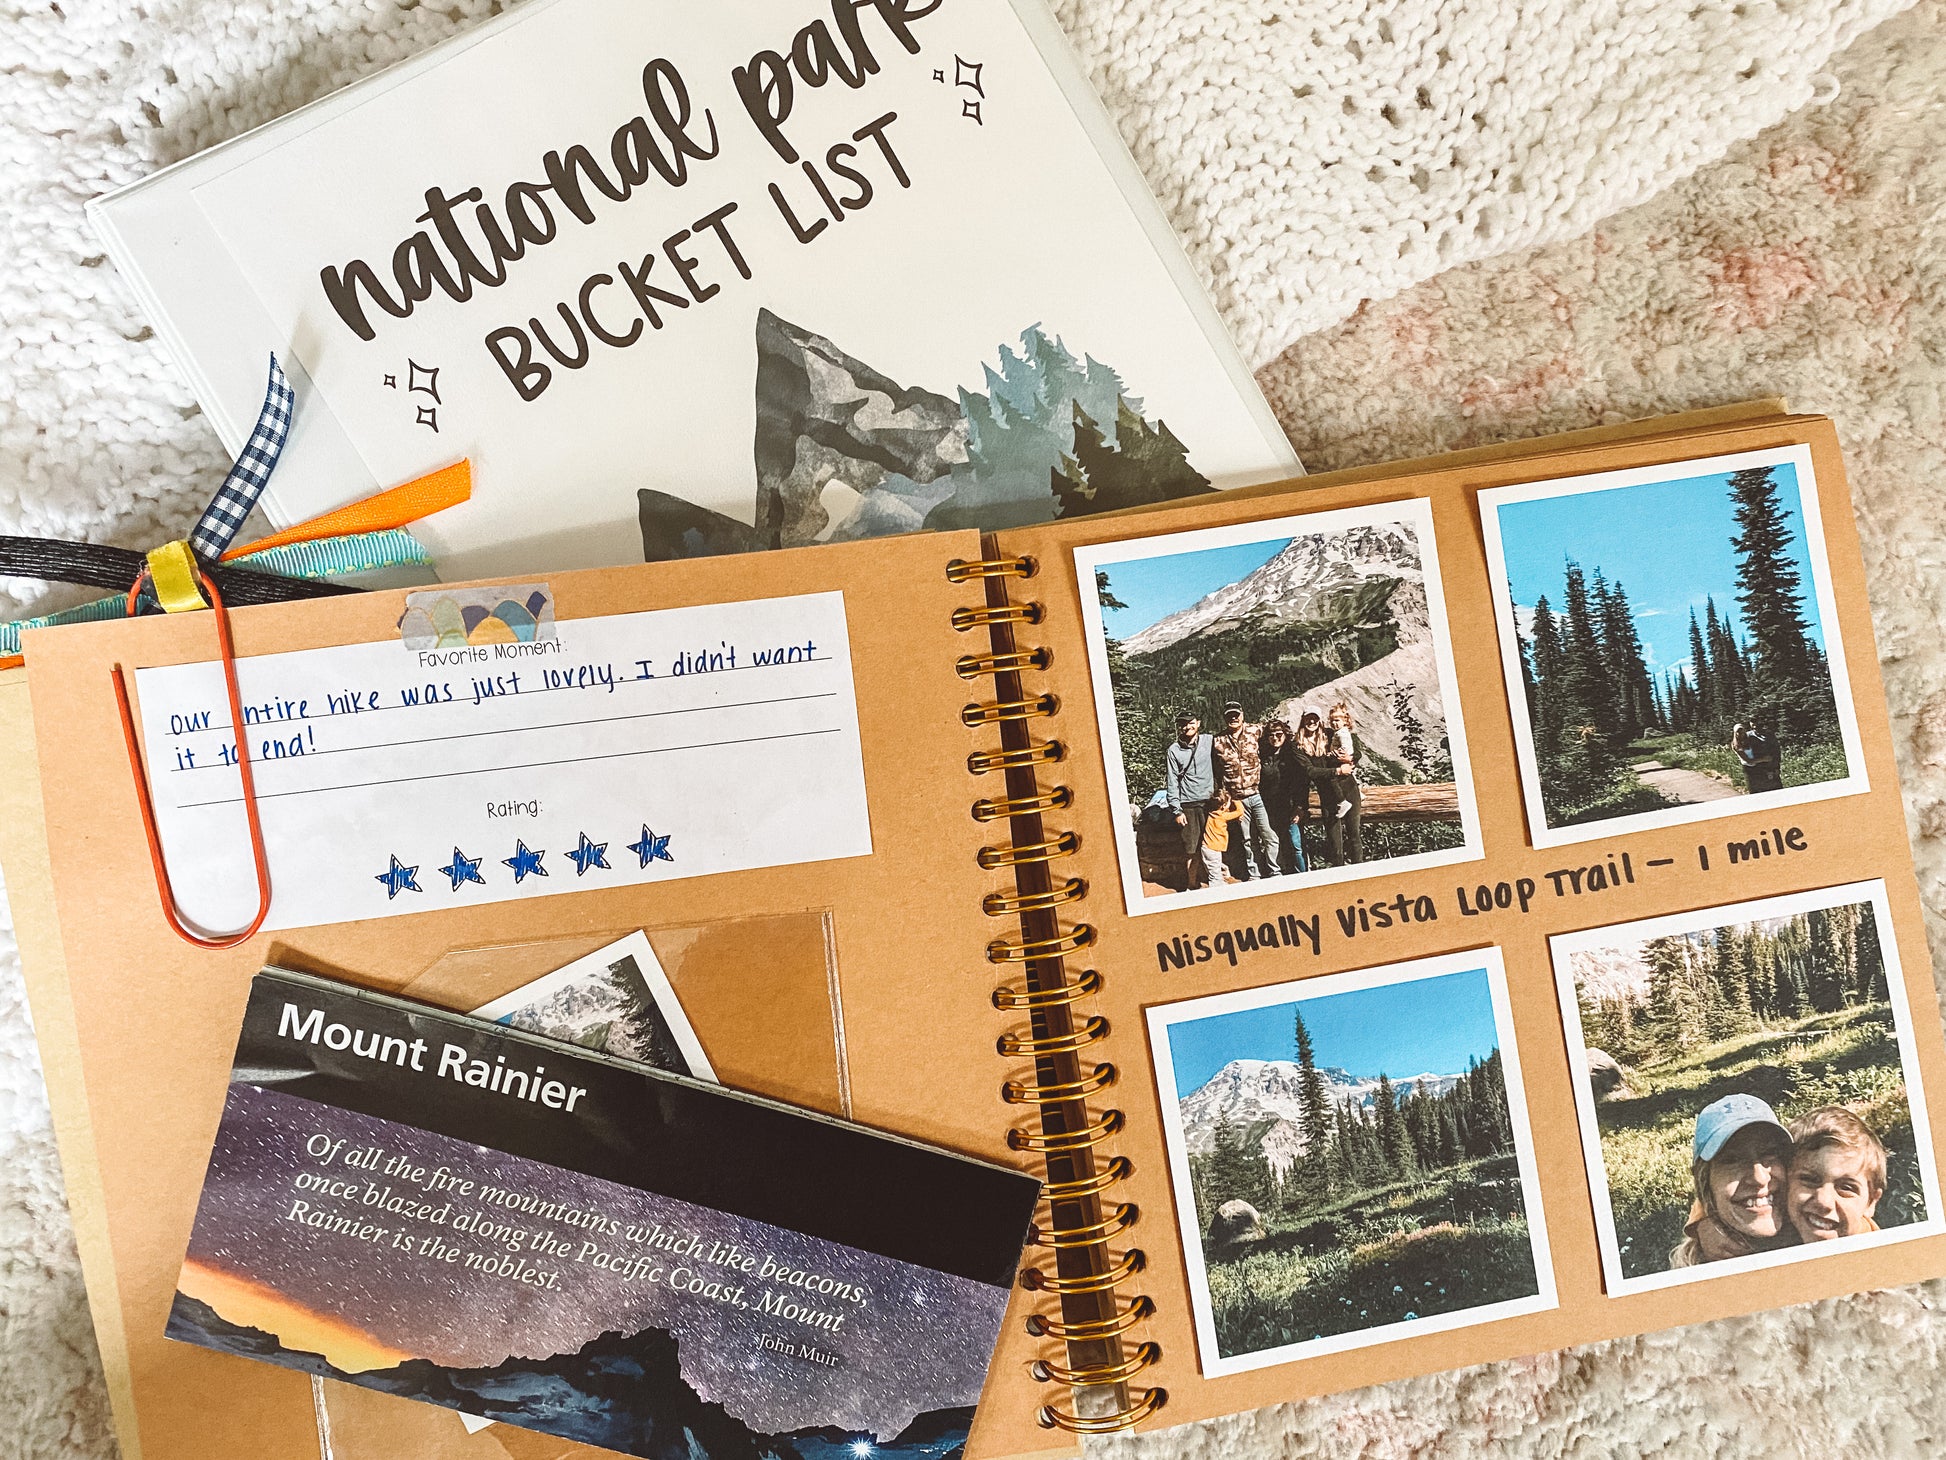 National Parks Bucket Journal 2024 Edition (w/ FREE Printable 131